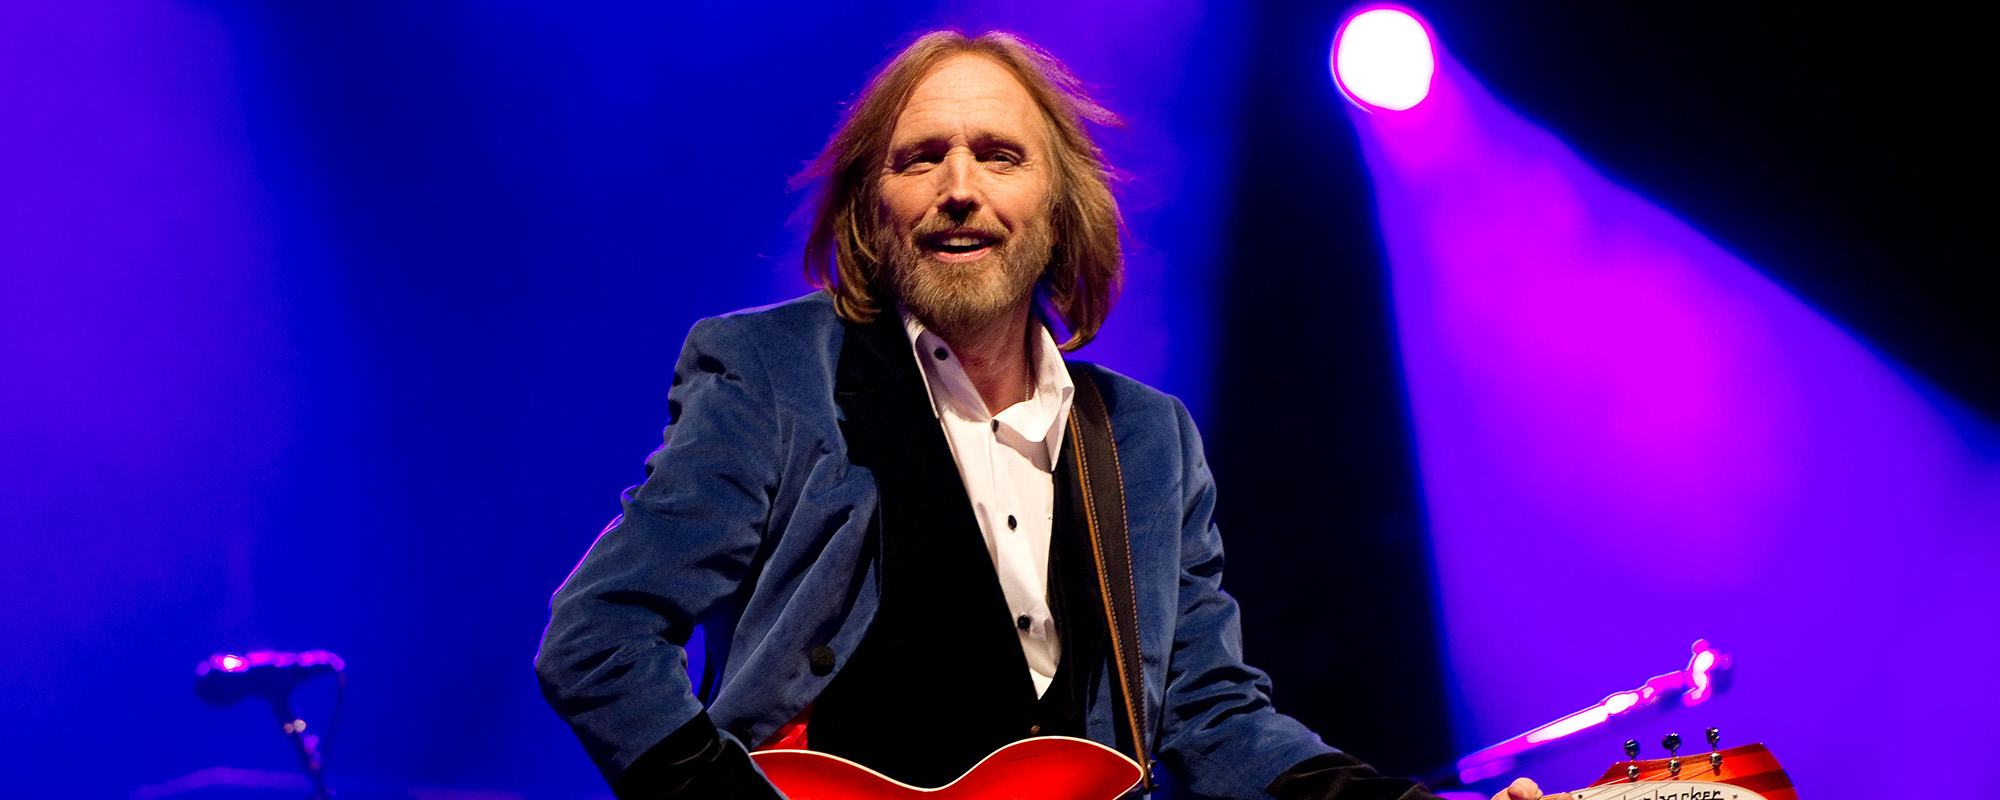 The Story Behind Tom Petty’s Futuristic “You Got Lucky”